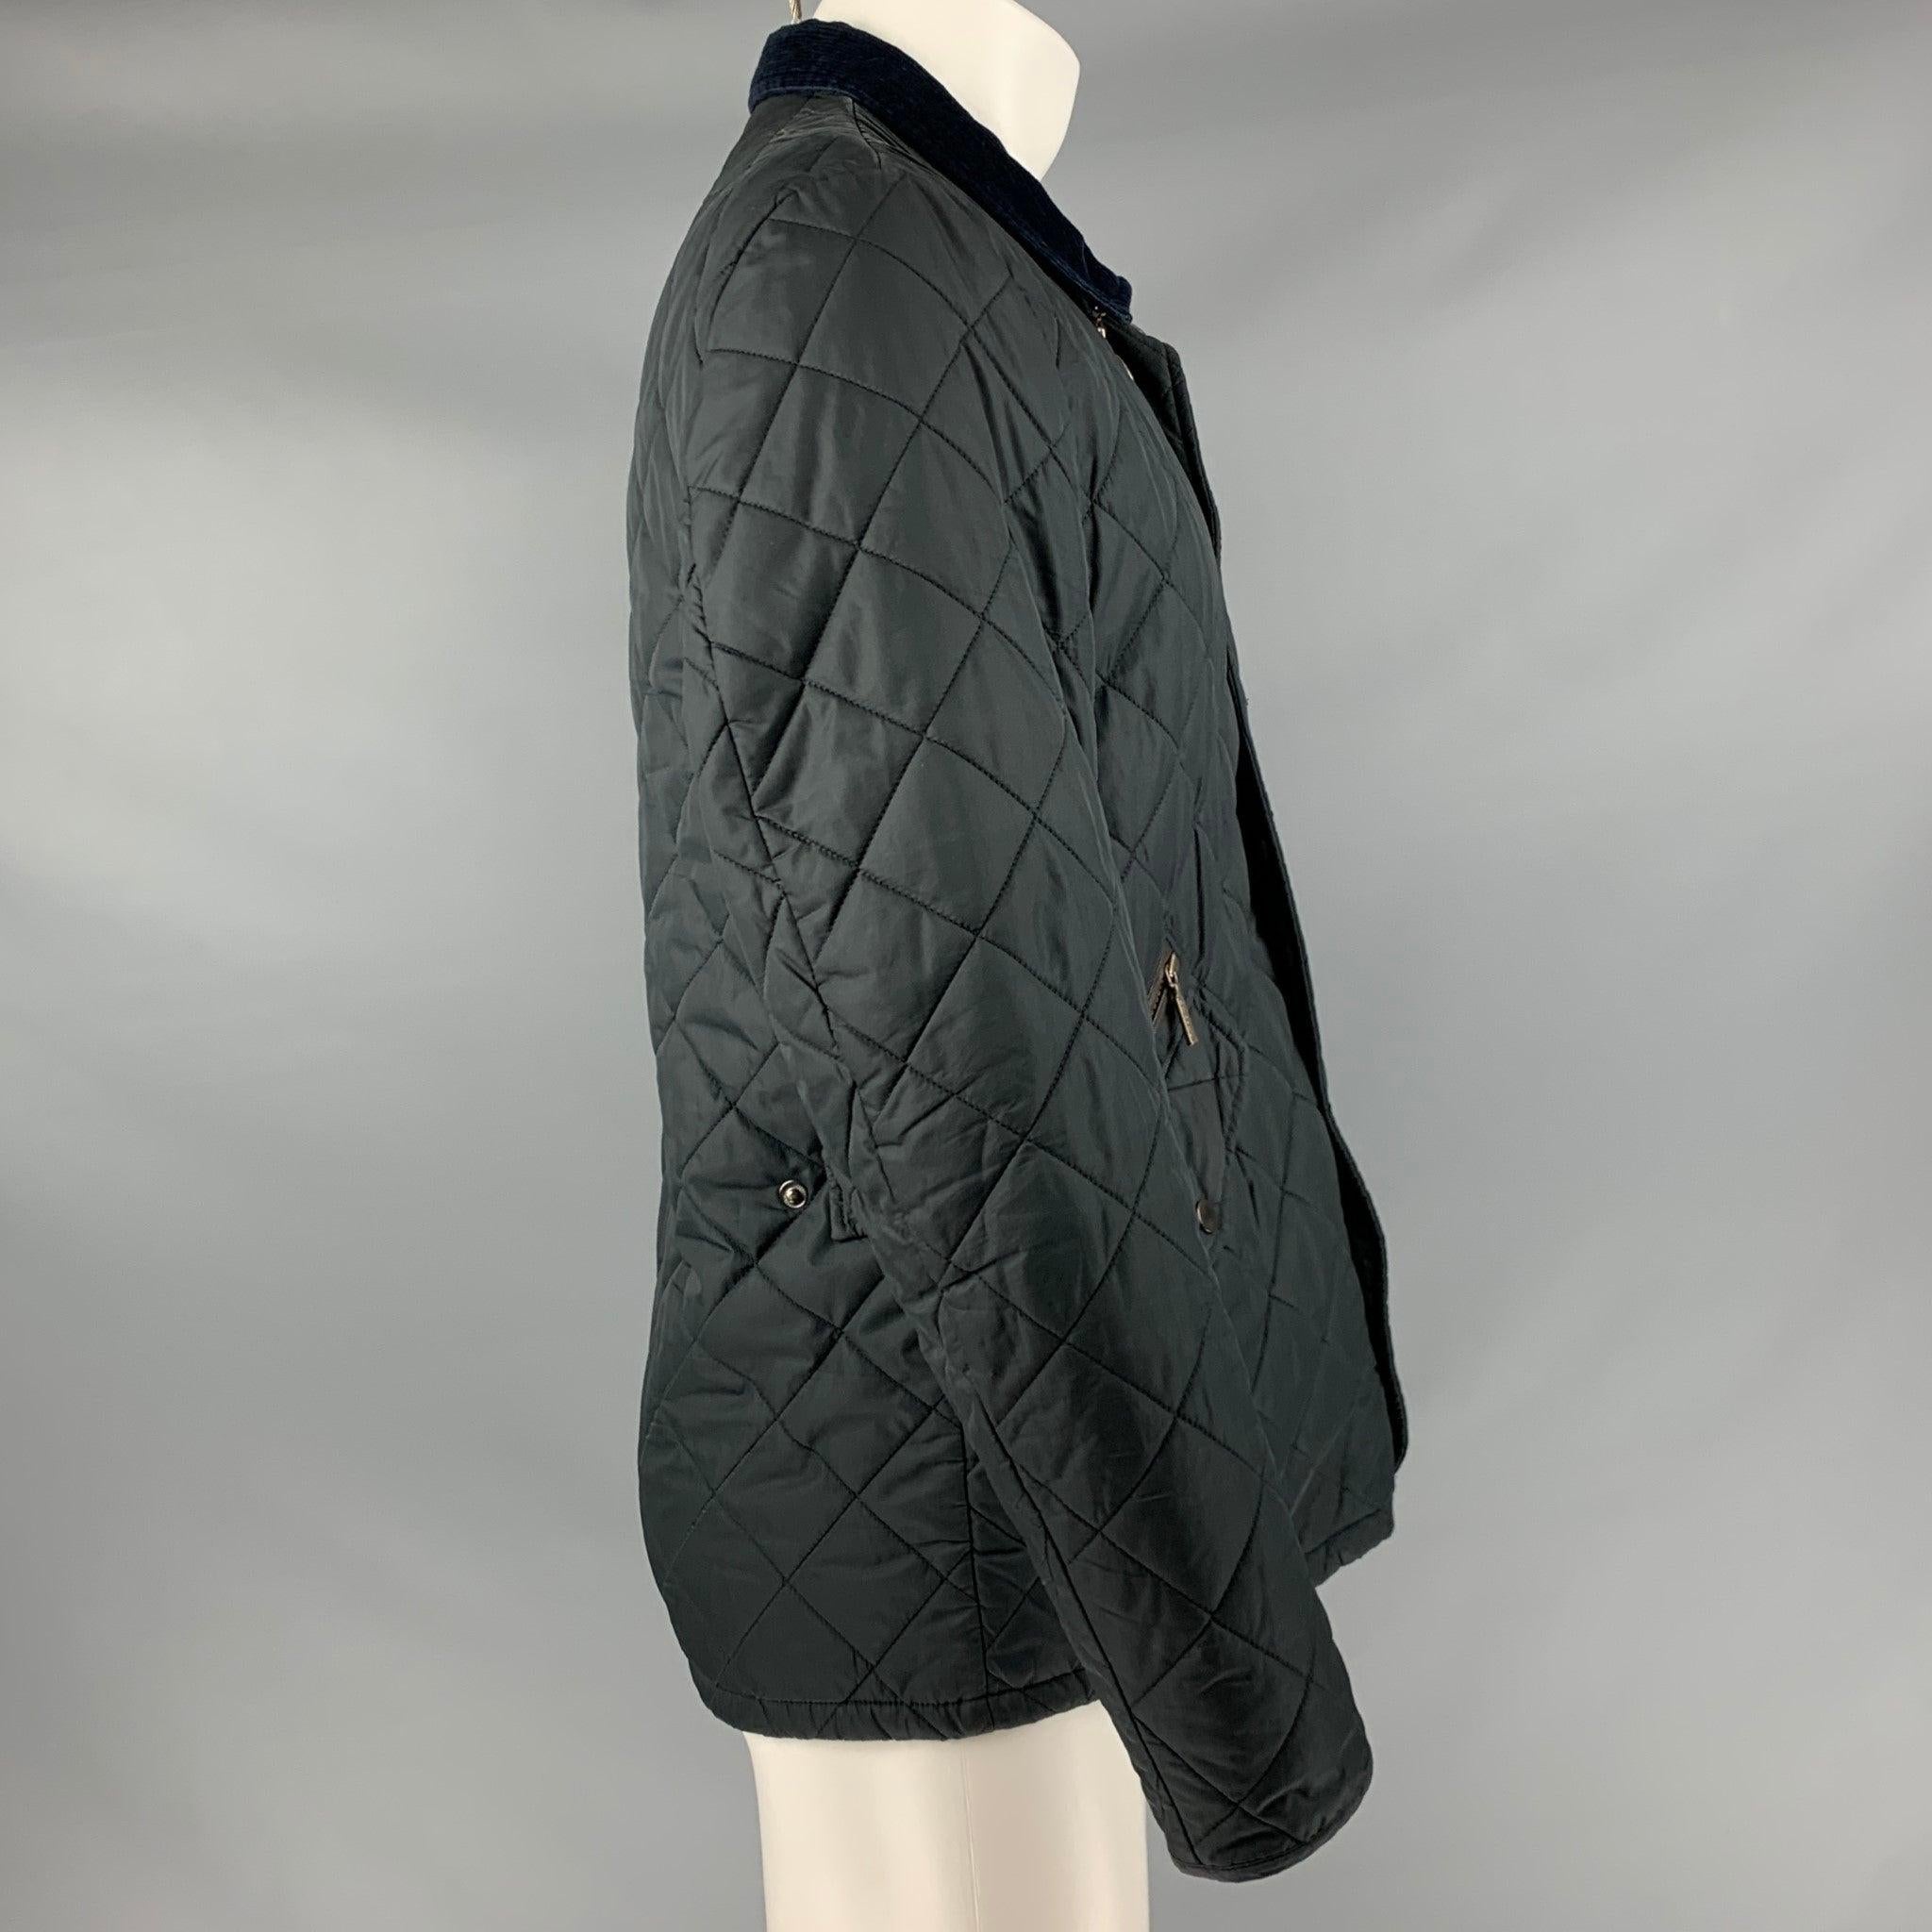 BARBOUR
jacket in a black fabric featuring a quilted style, two pockets, and a zips and snaps closure.Excellent Pre-Owned Condition. 

Marked:   S 

Measurements: 
 
Shoulder: 17 inches Chest: 38 inches Sleeve: 24.5 inches Length: 28.5 inches 
  
 